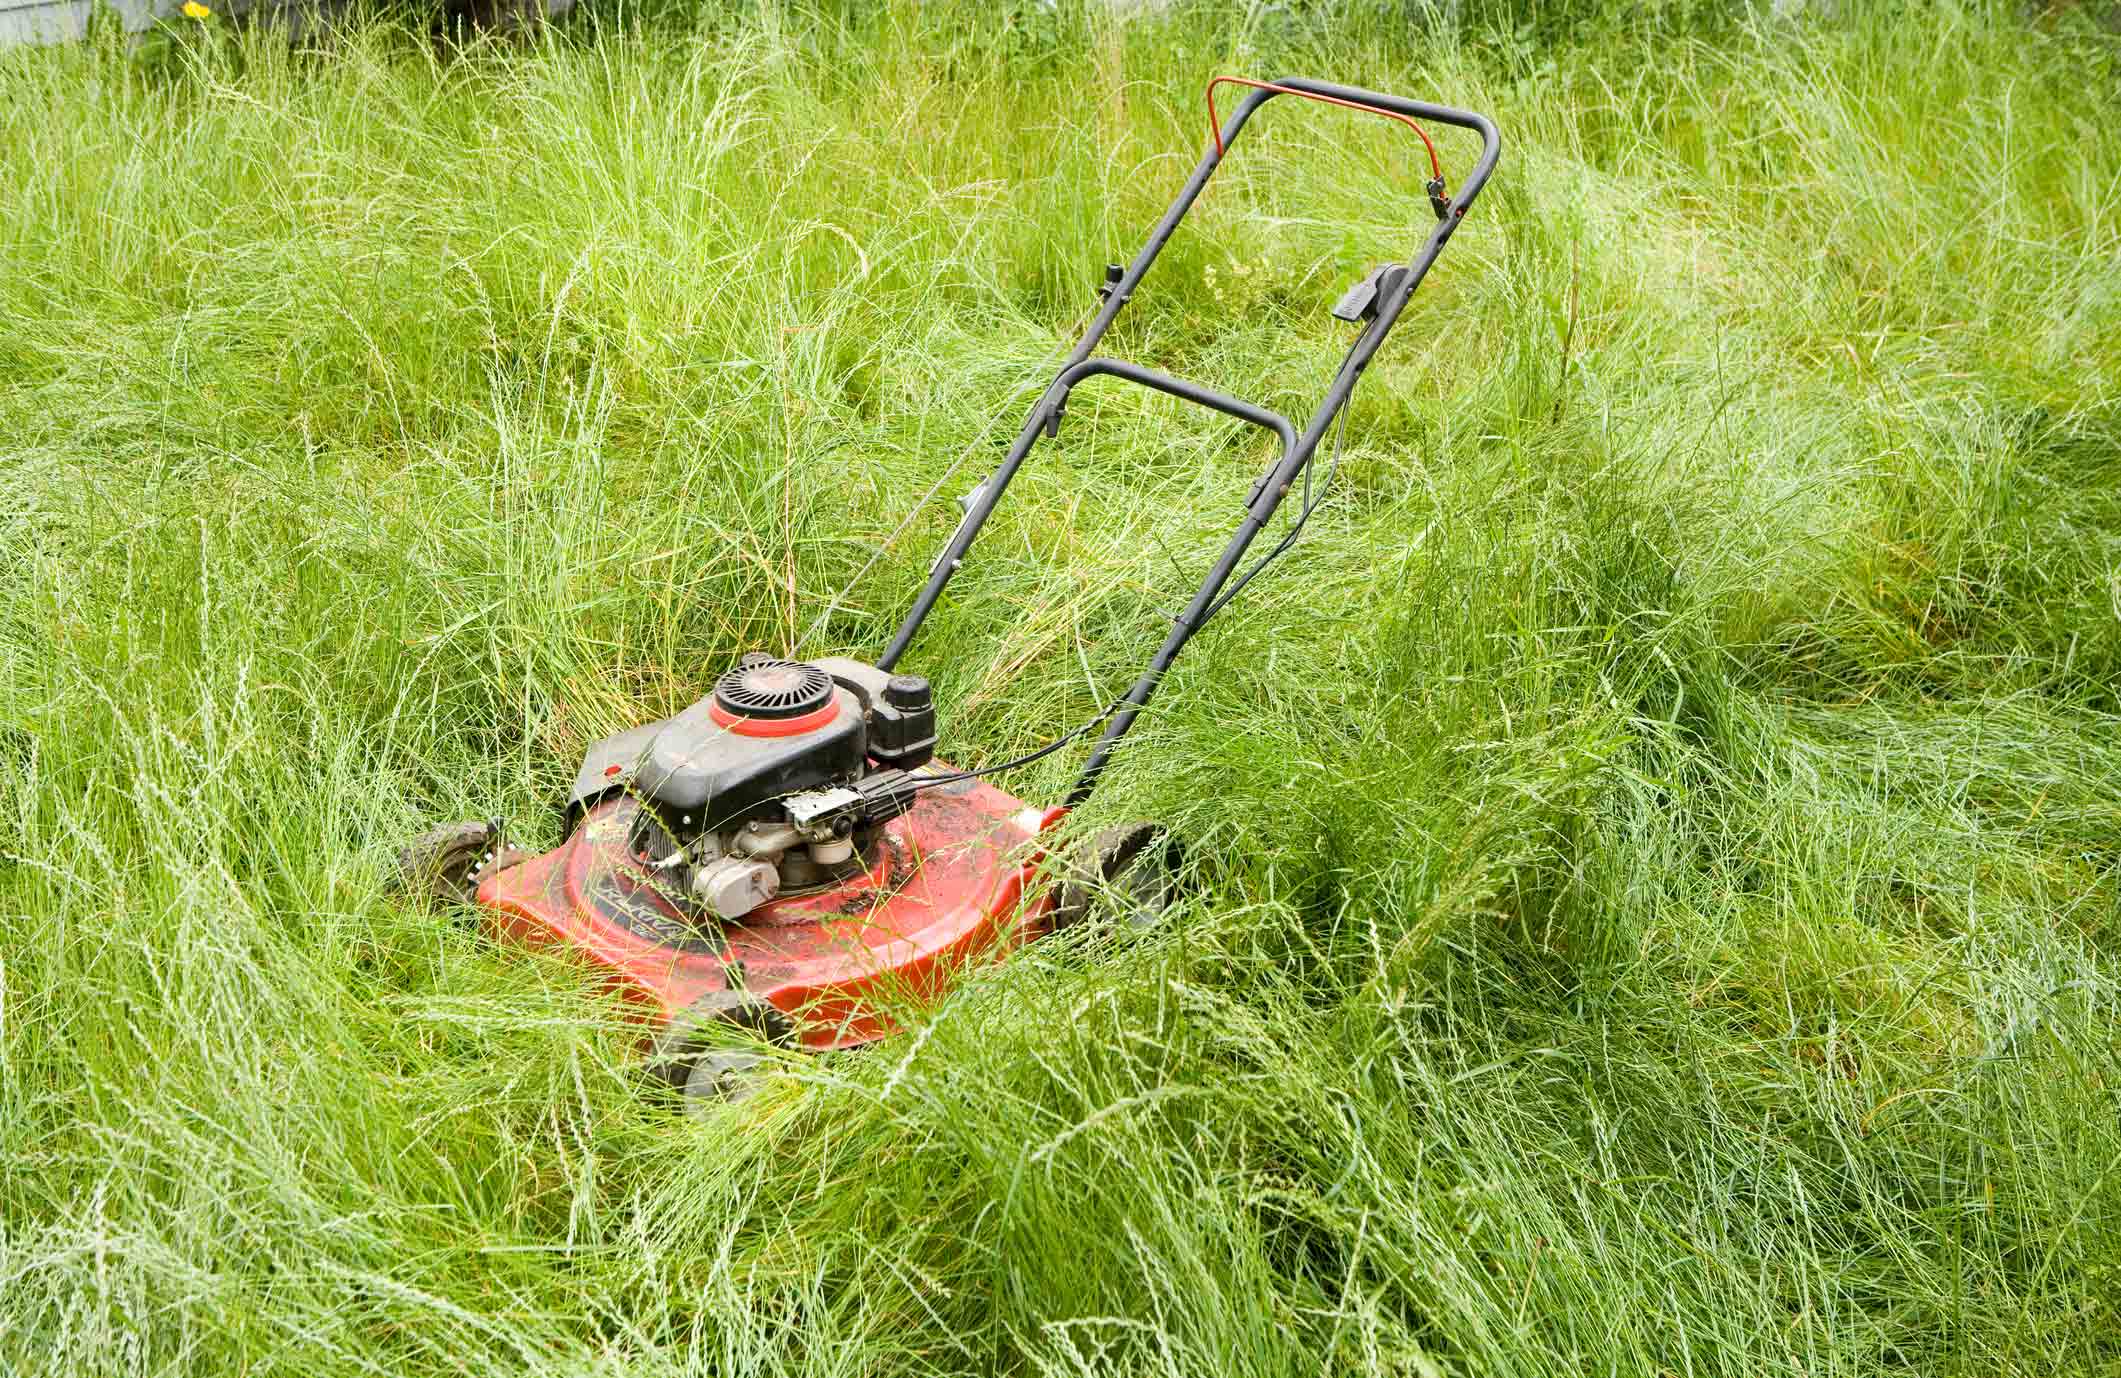 Don’t wait too long between mowing